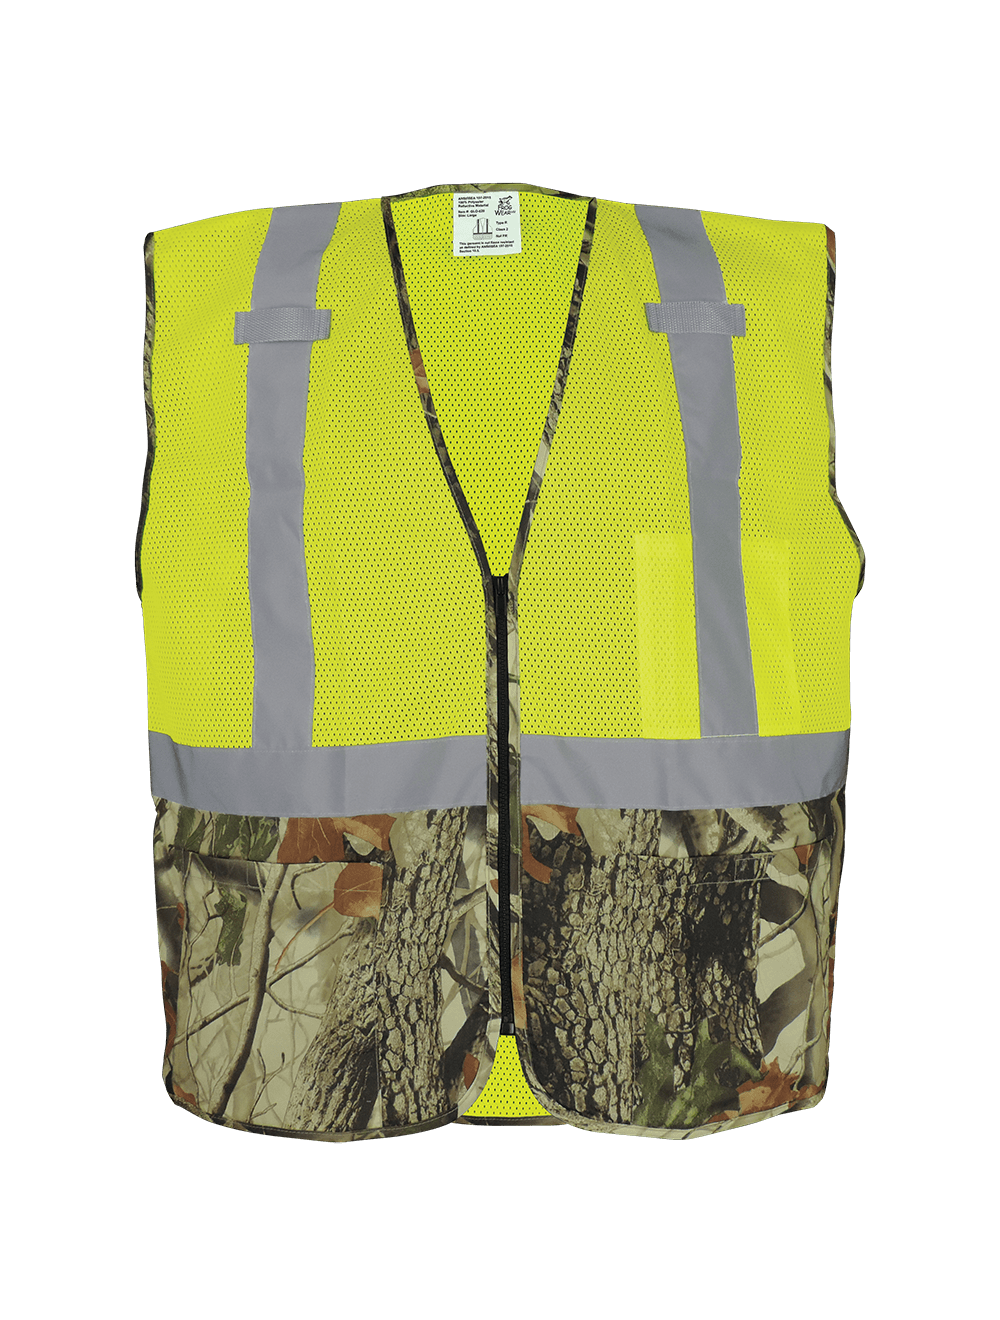 FrogWear® HV High-Visibility Yellow/Green Safety Vest with Camouflage Bottom - GLO-020